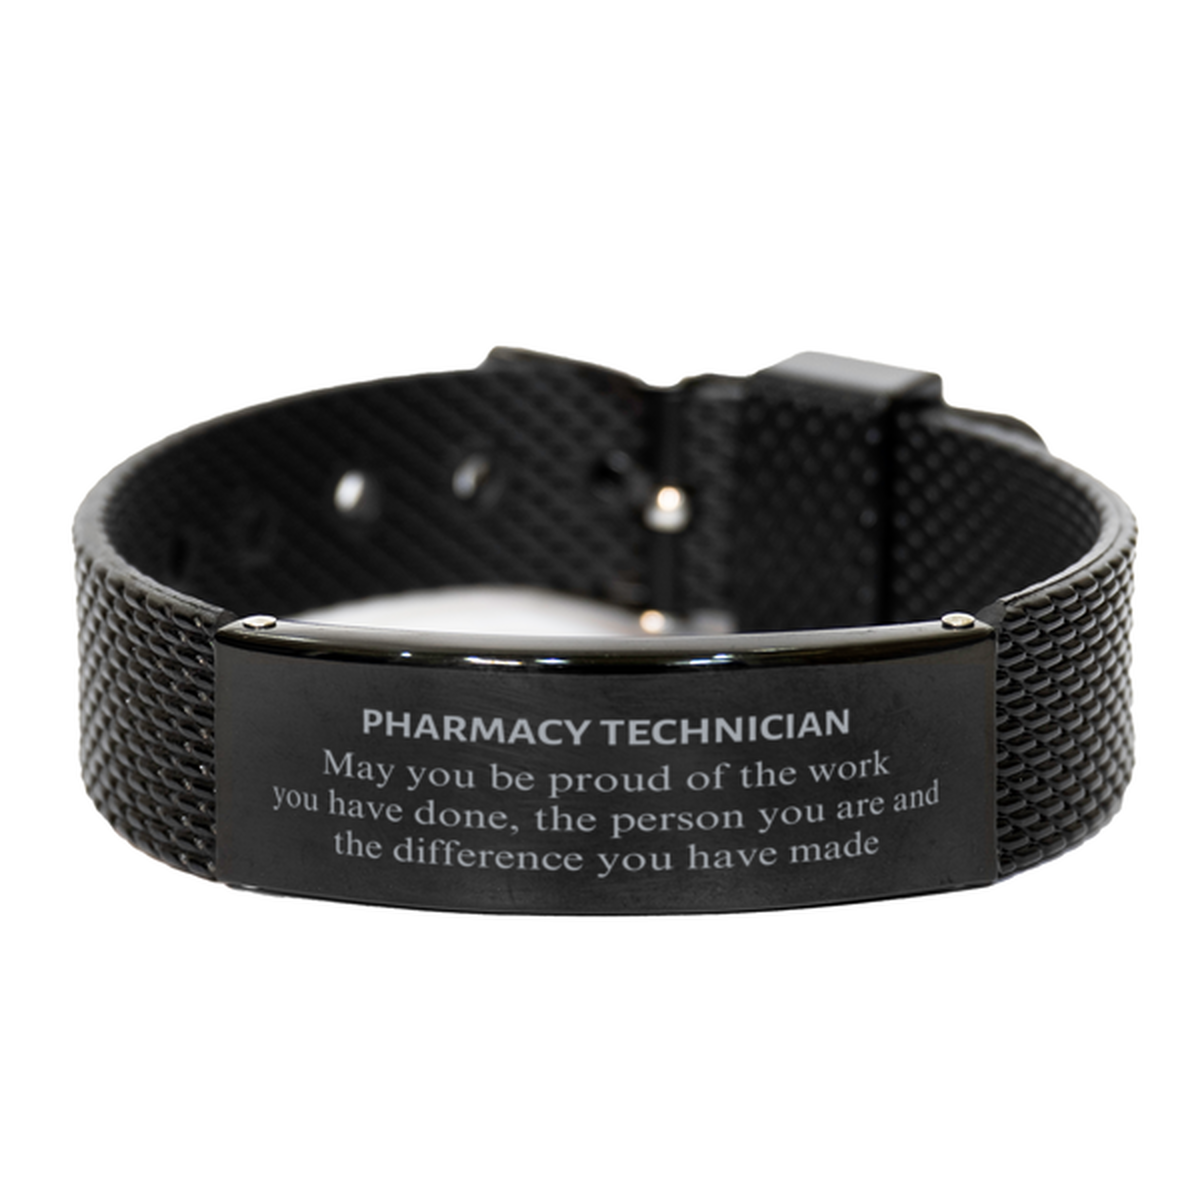 Pharmacy Technician May you be proud of the work you have done, Retirement Pharmacy Technician Black Shark Mesh Bracelet for Colleague Appreciation Gifts Amazing for Pharmacy Technician